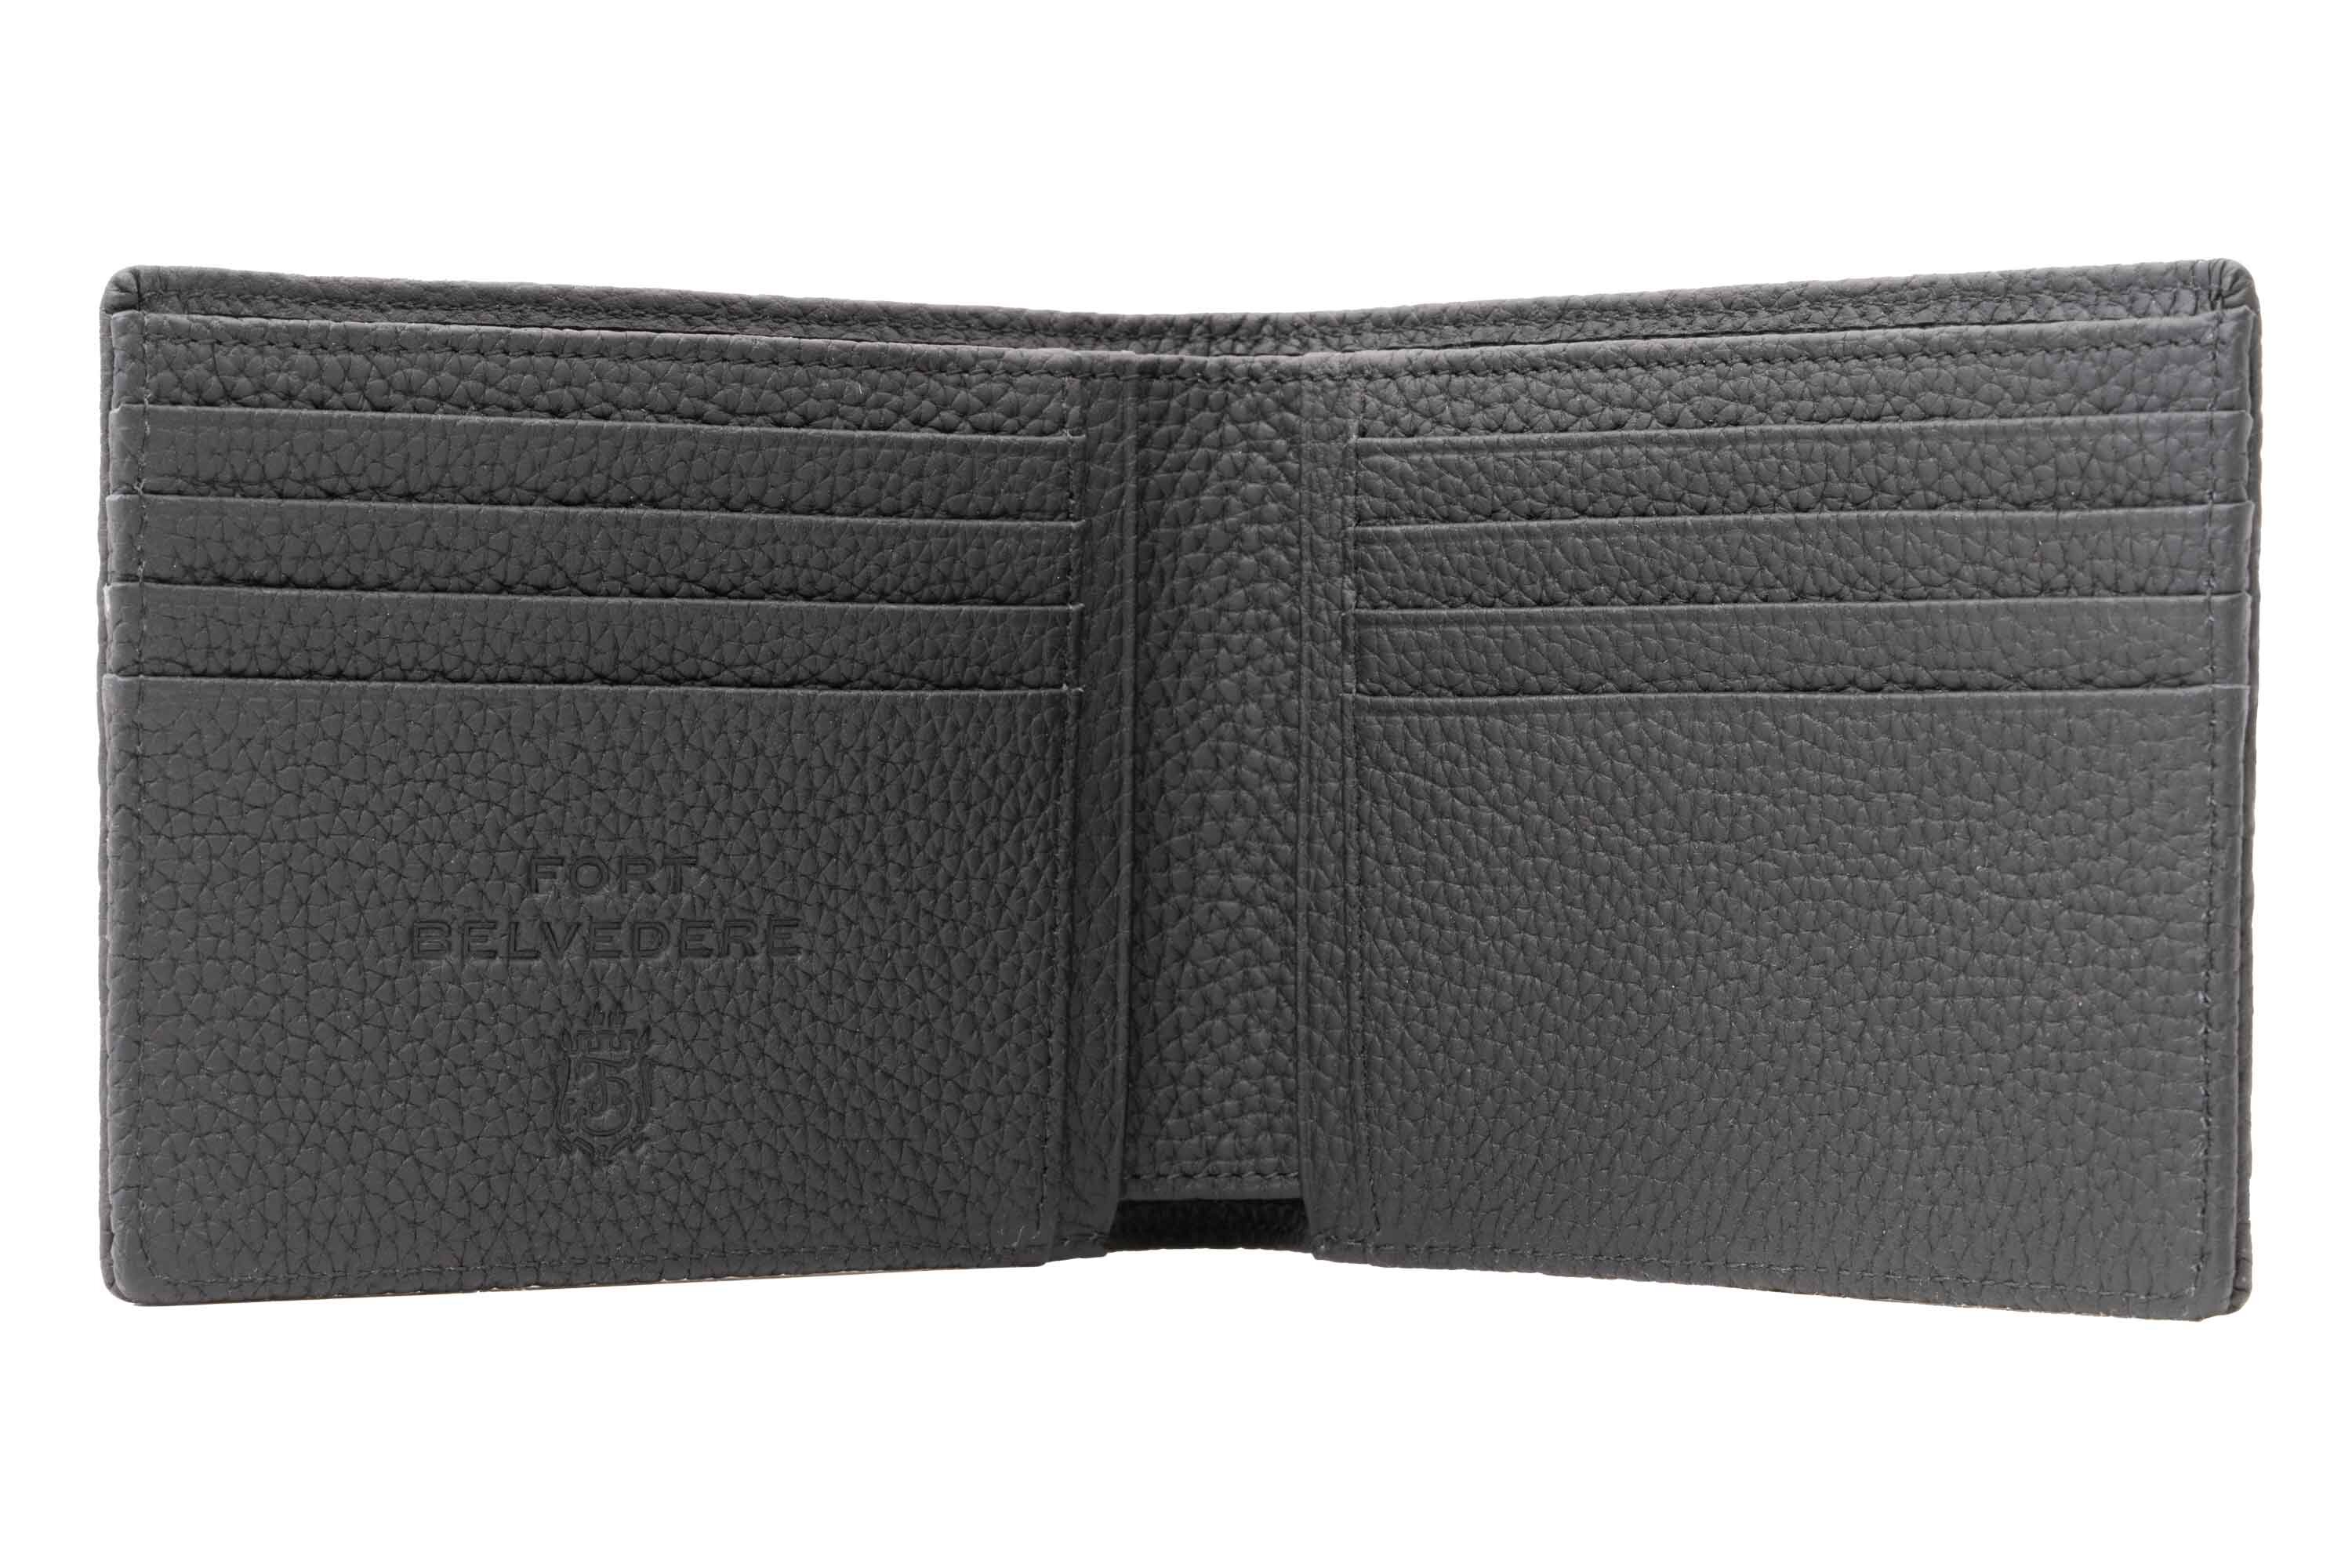 Eight Card Carrier Bifold Wallet in Black Togo Leather 8 card slots